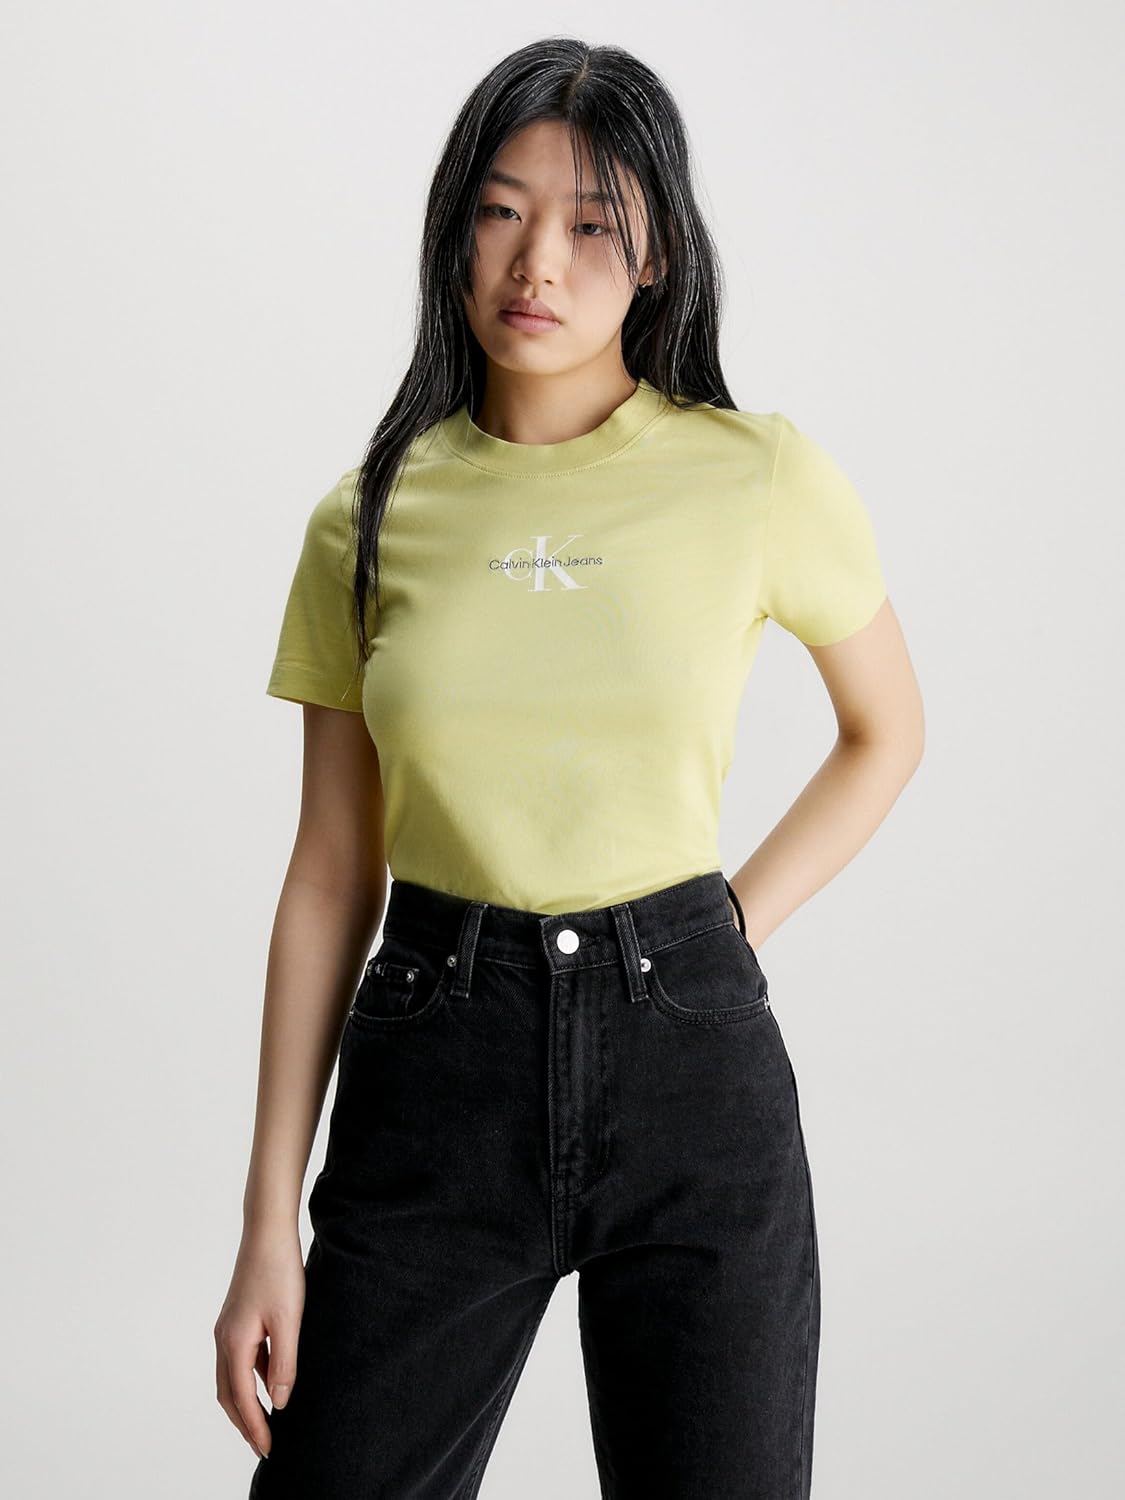 CK JEANS Womens S/S Knit Tops Polo Shirt